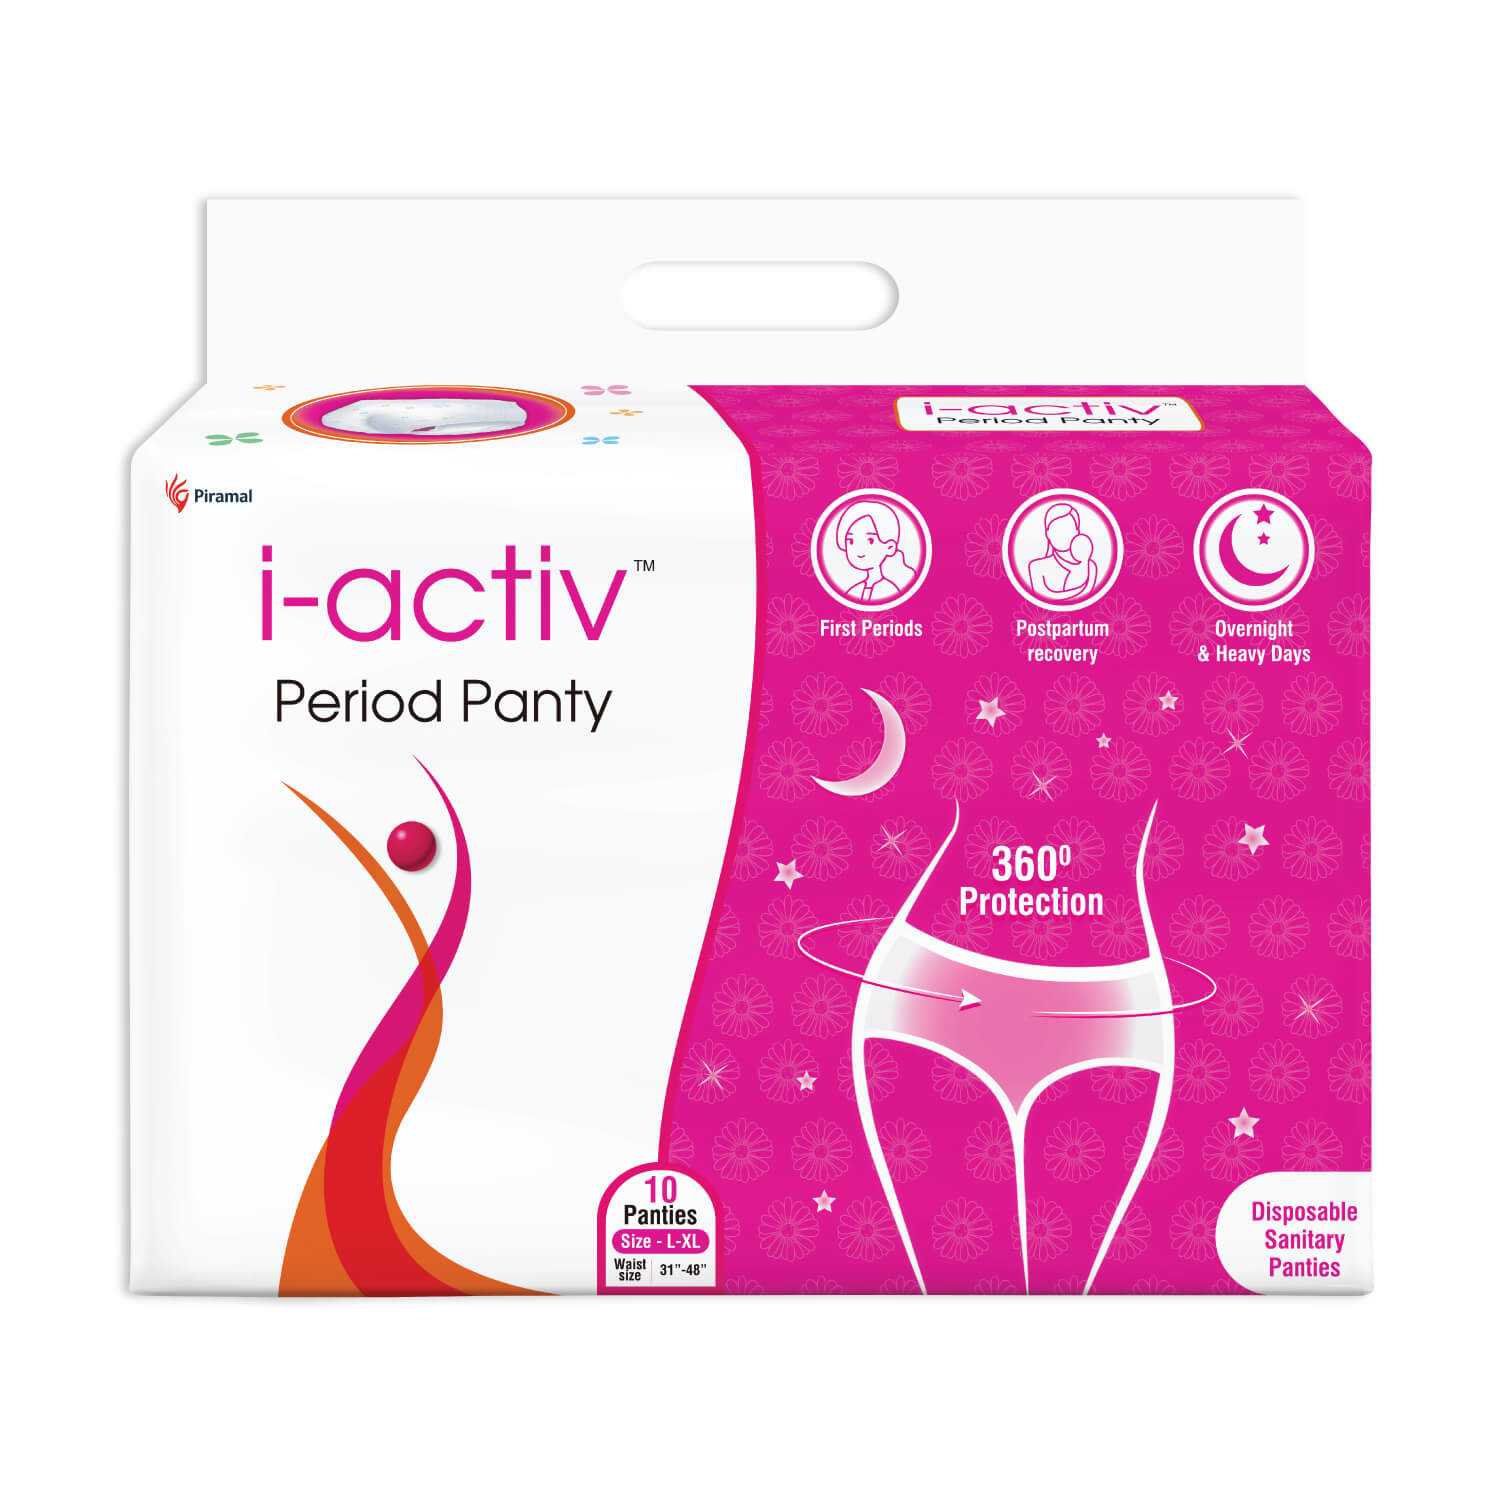 SPONGY HUB Disposable Panties with Pad Specially Designed for Periods and  Post Maternity (Pack of 20) Size M Sanitary Pad, Buy Women Hygiene  products online in India